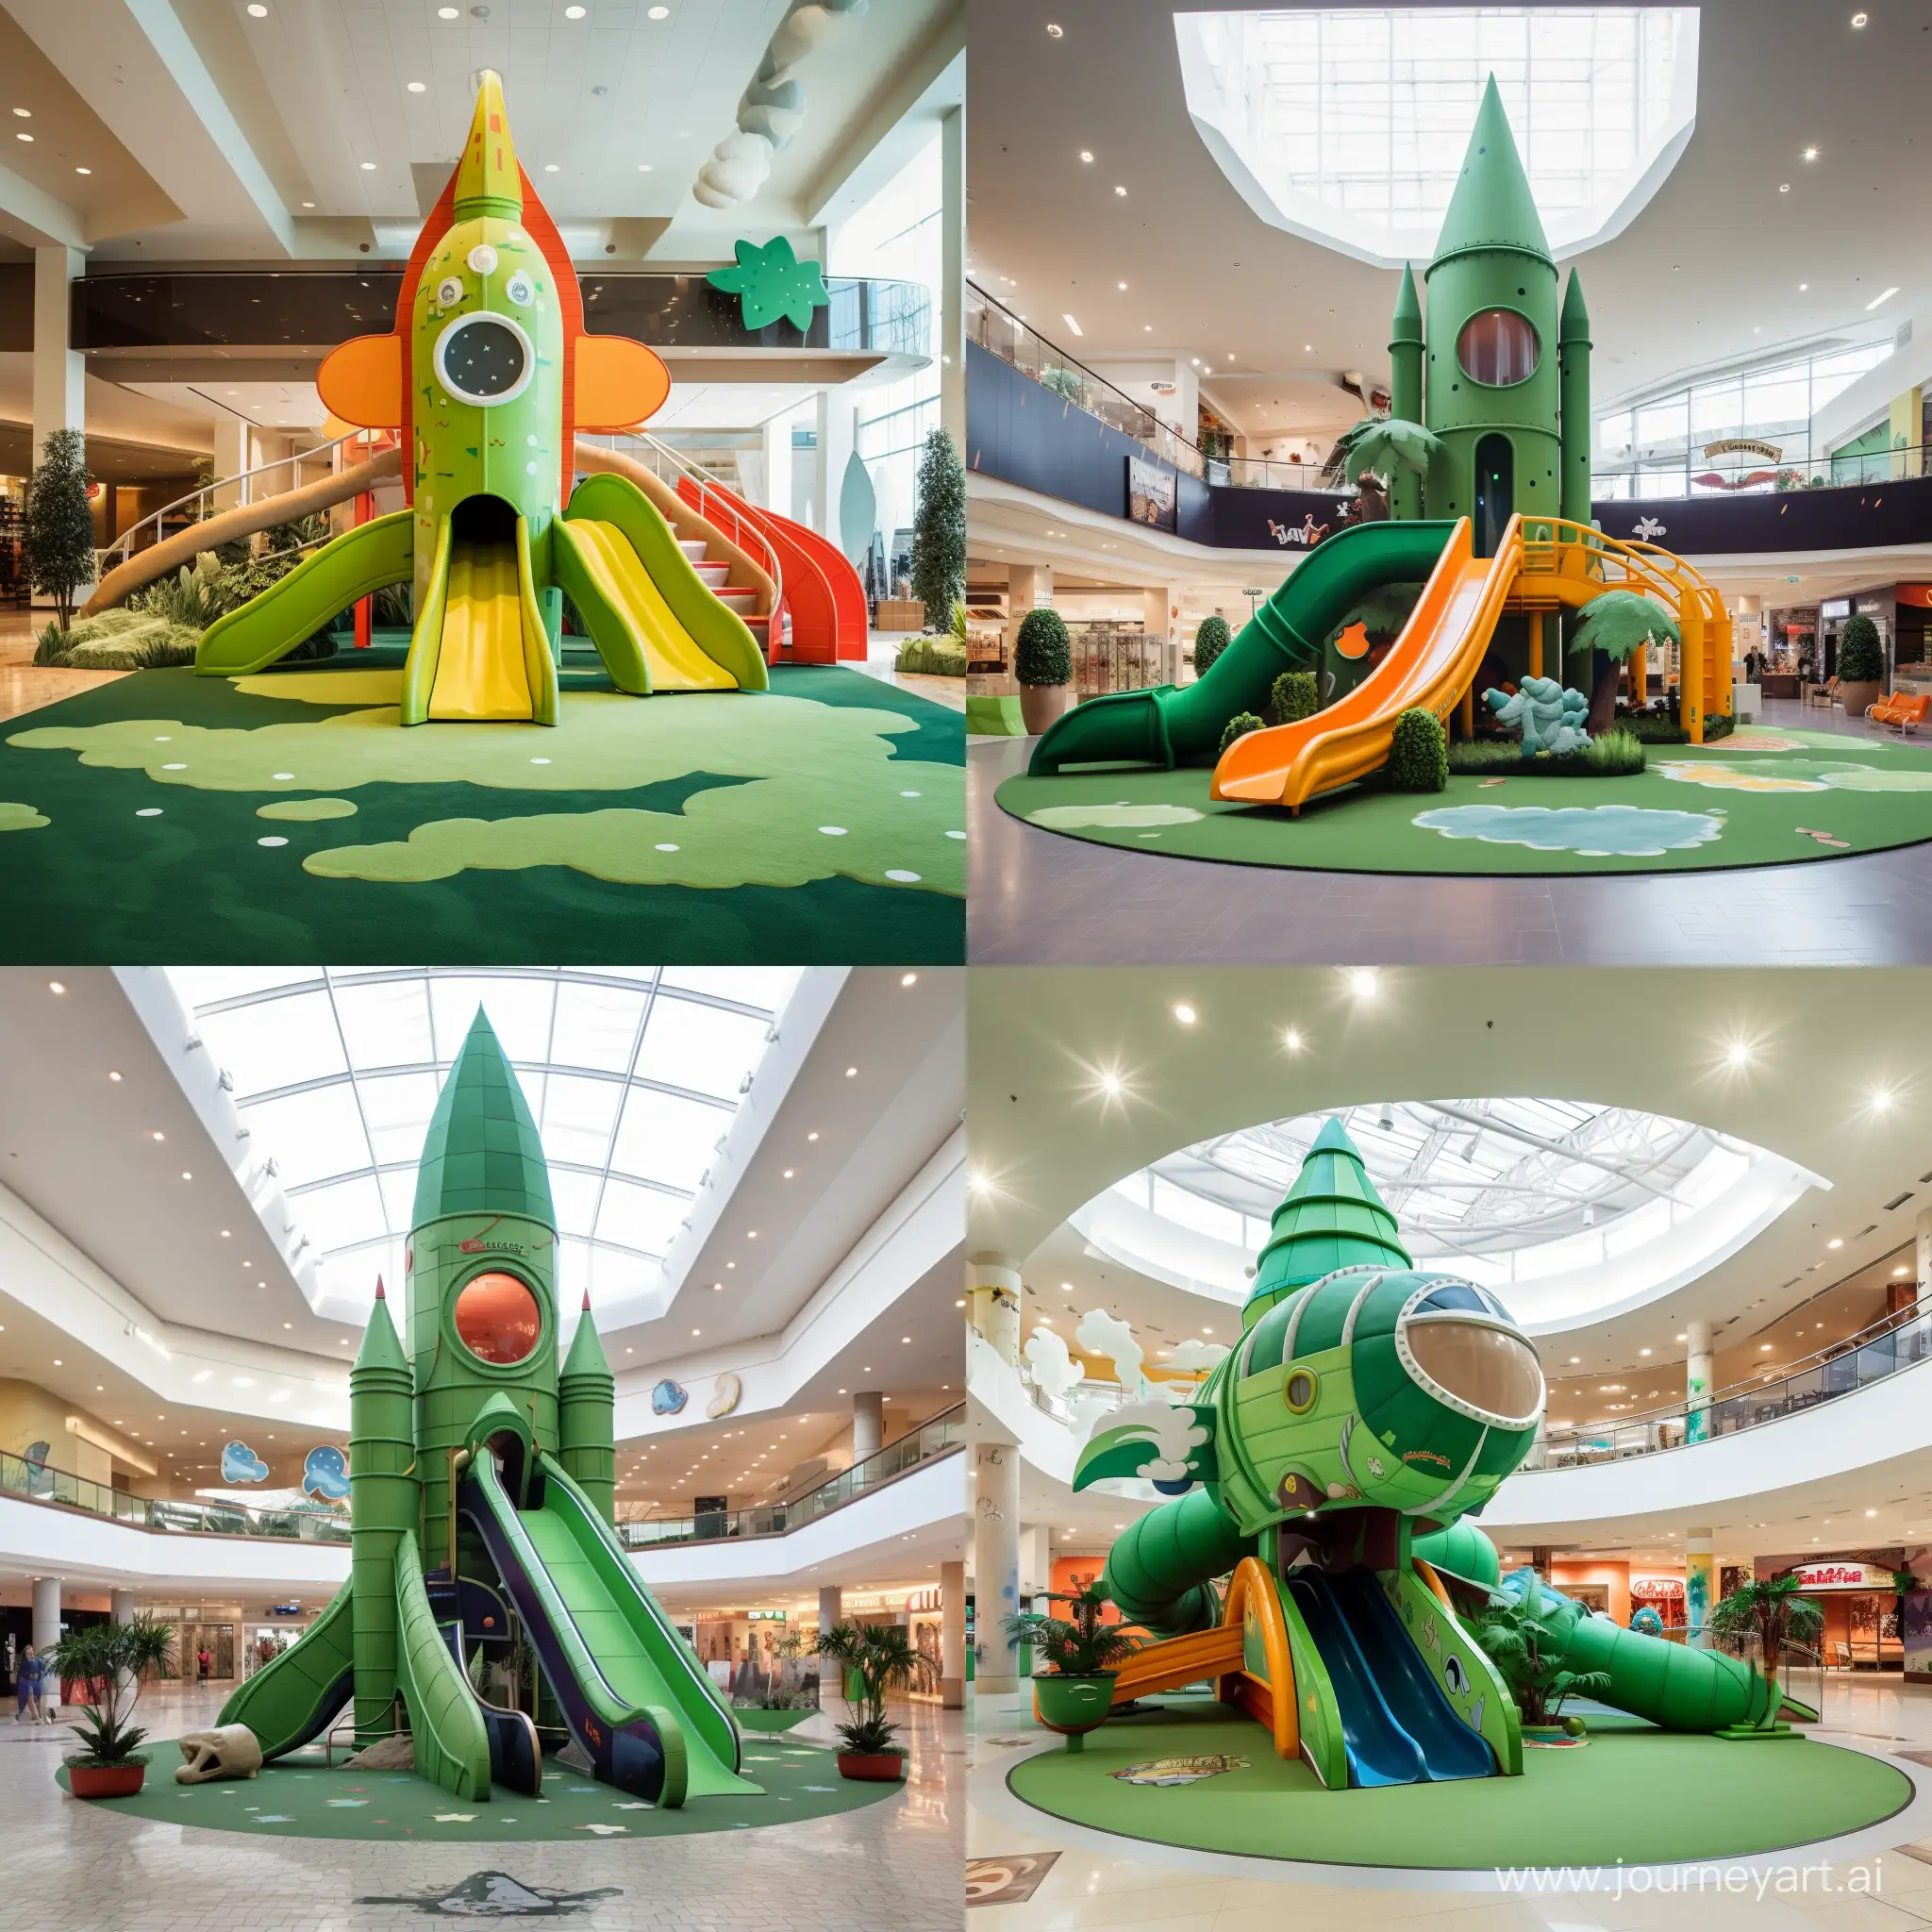 Rocketthemed-Childrens-Play-Area-in-Shopping-Center-with-Green-Slide-and-Clouds